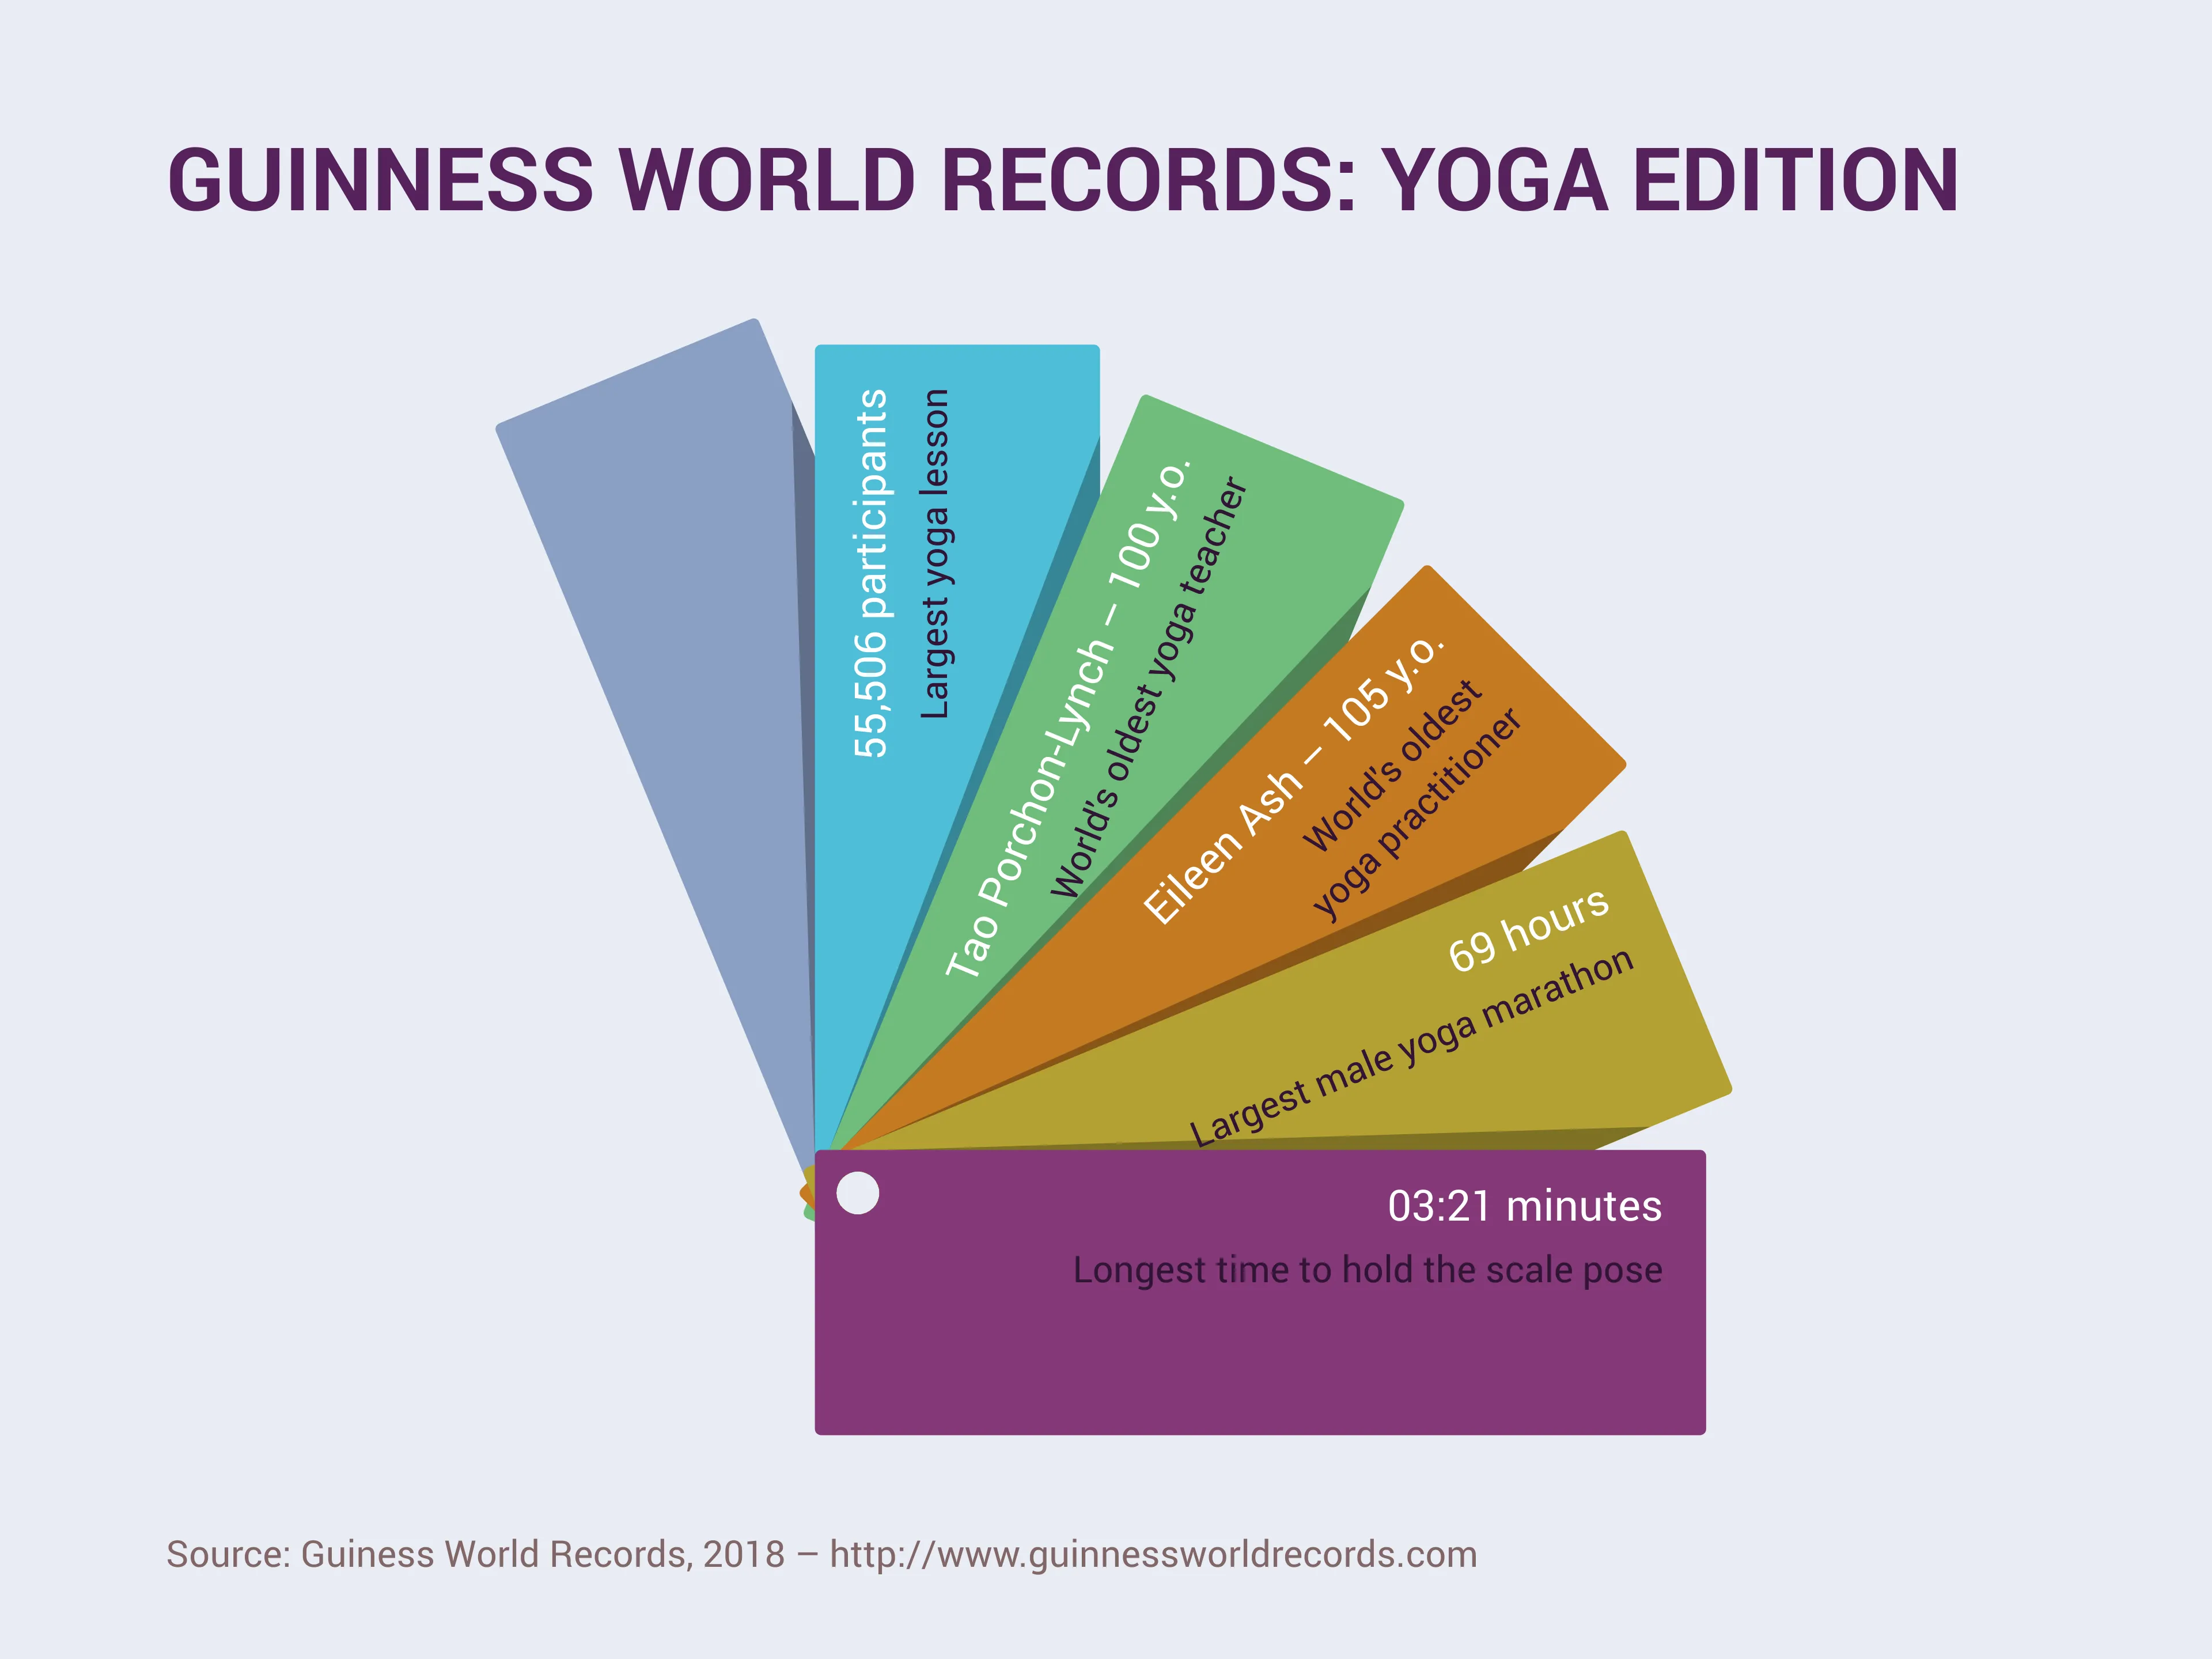 GUINNESS WORLD RECORDS: YOGA EDITION